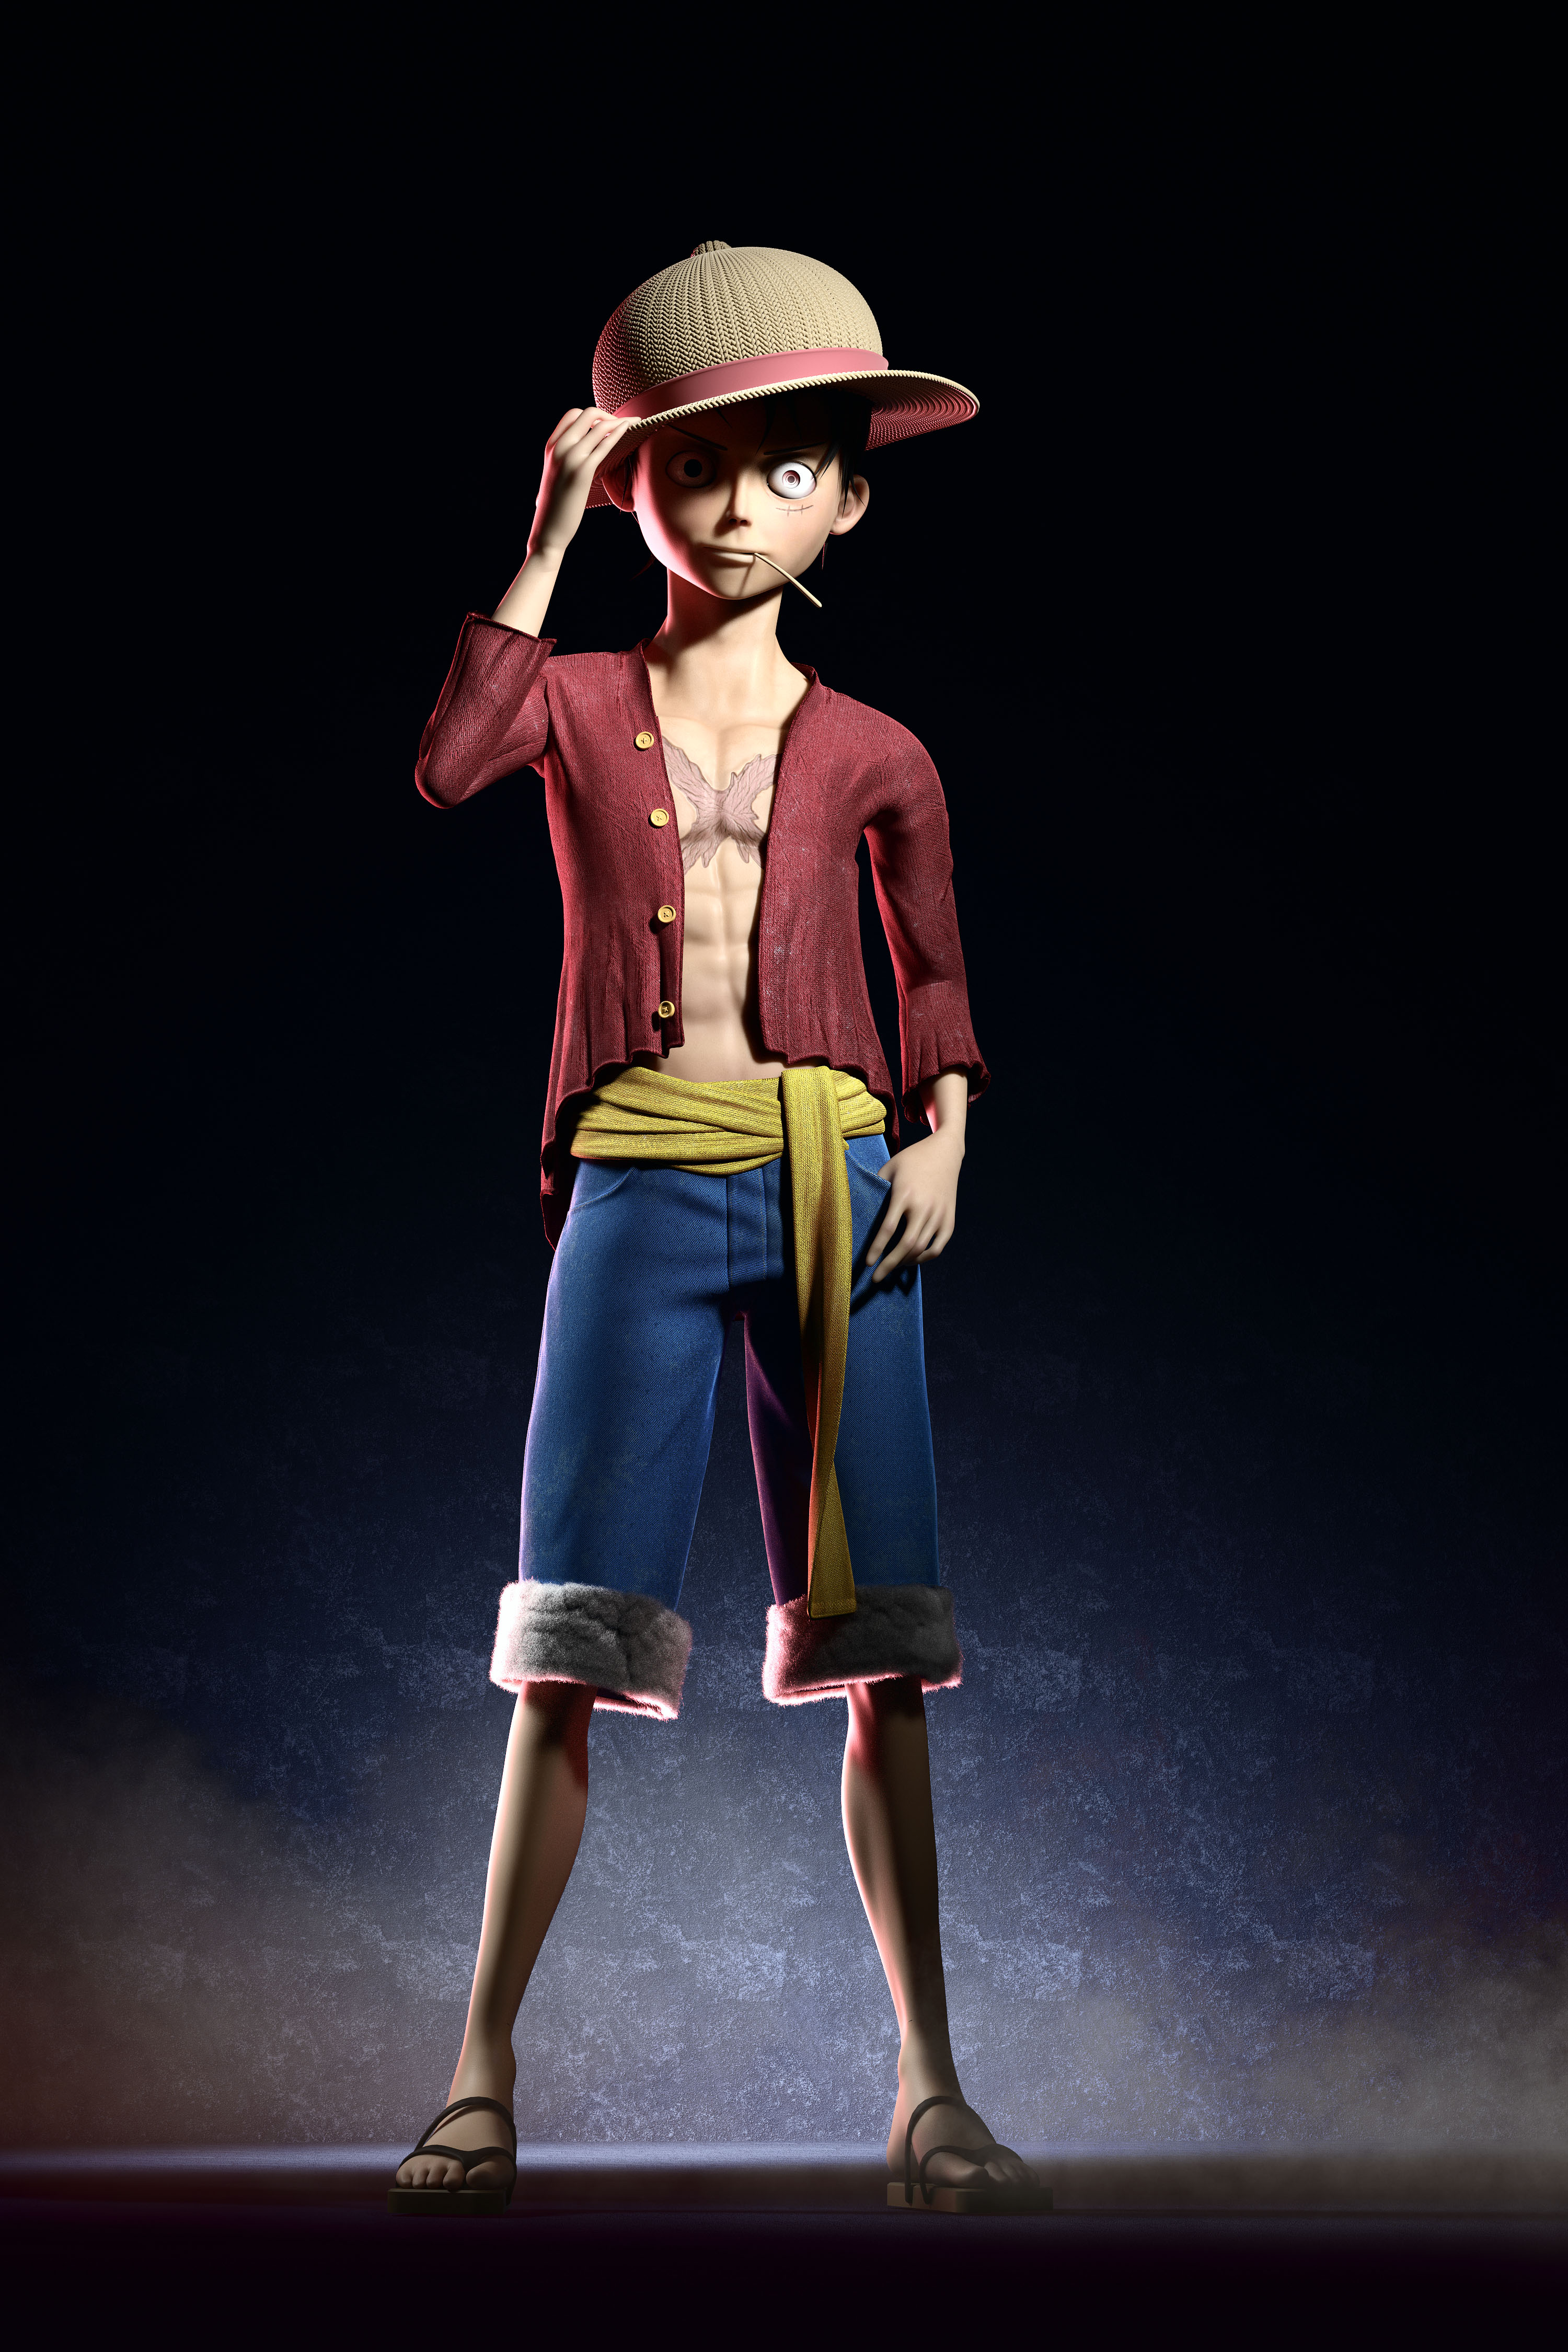 Luffy Gear 5 - Finished Projects - Blender Artists Community